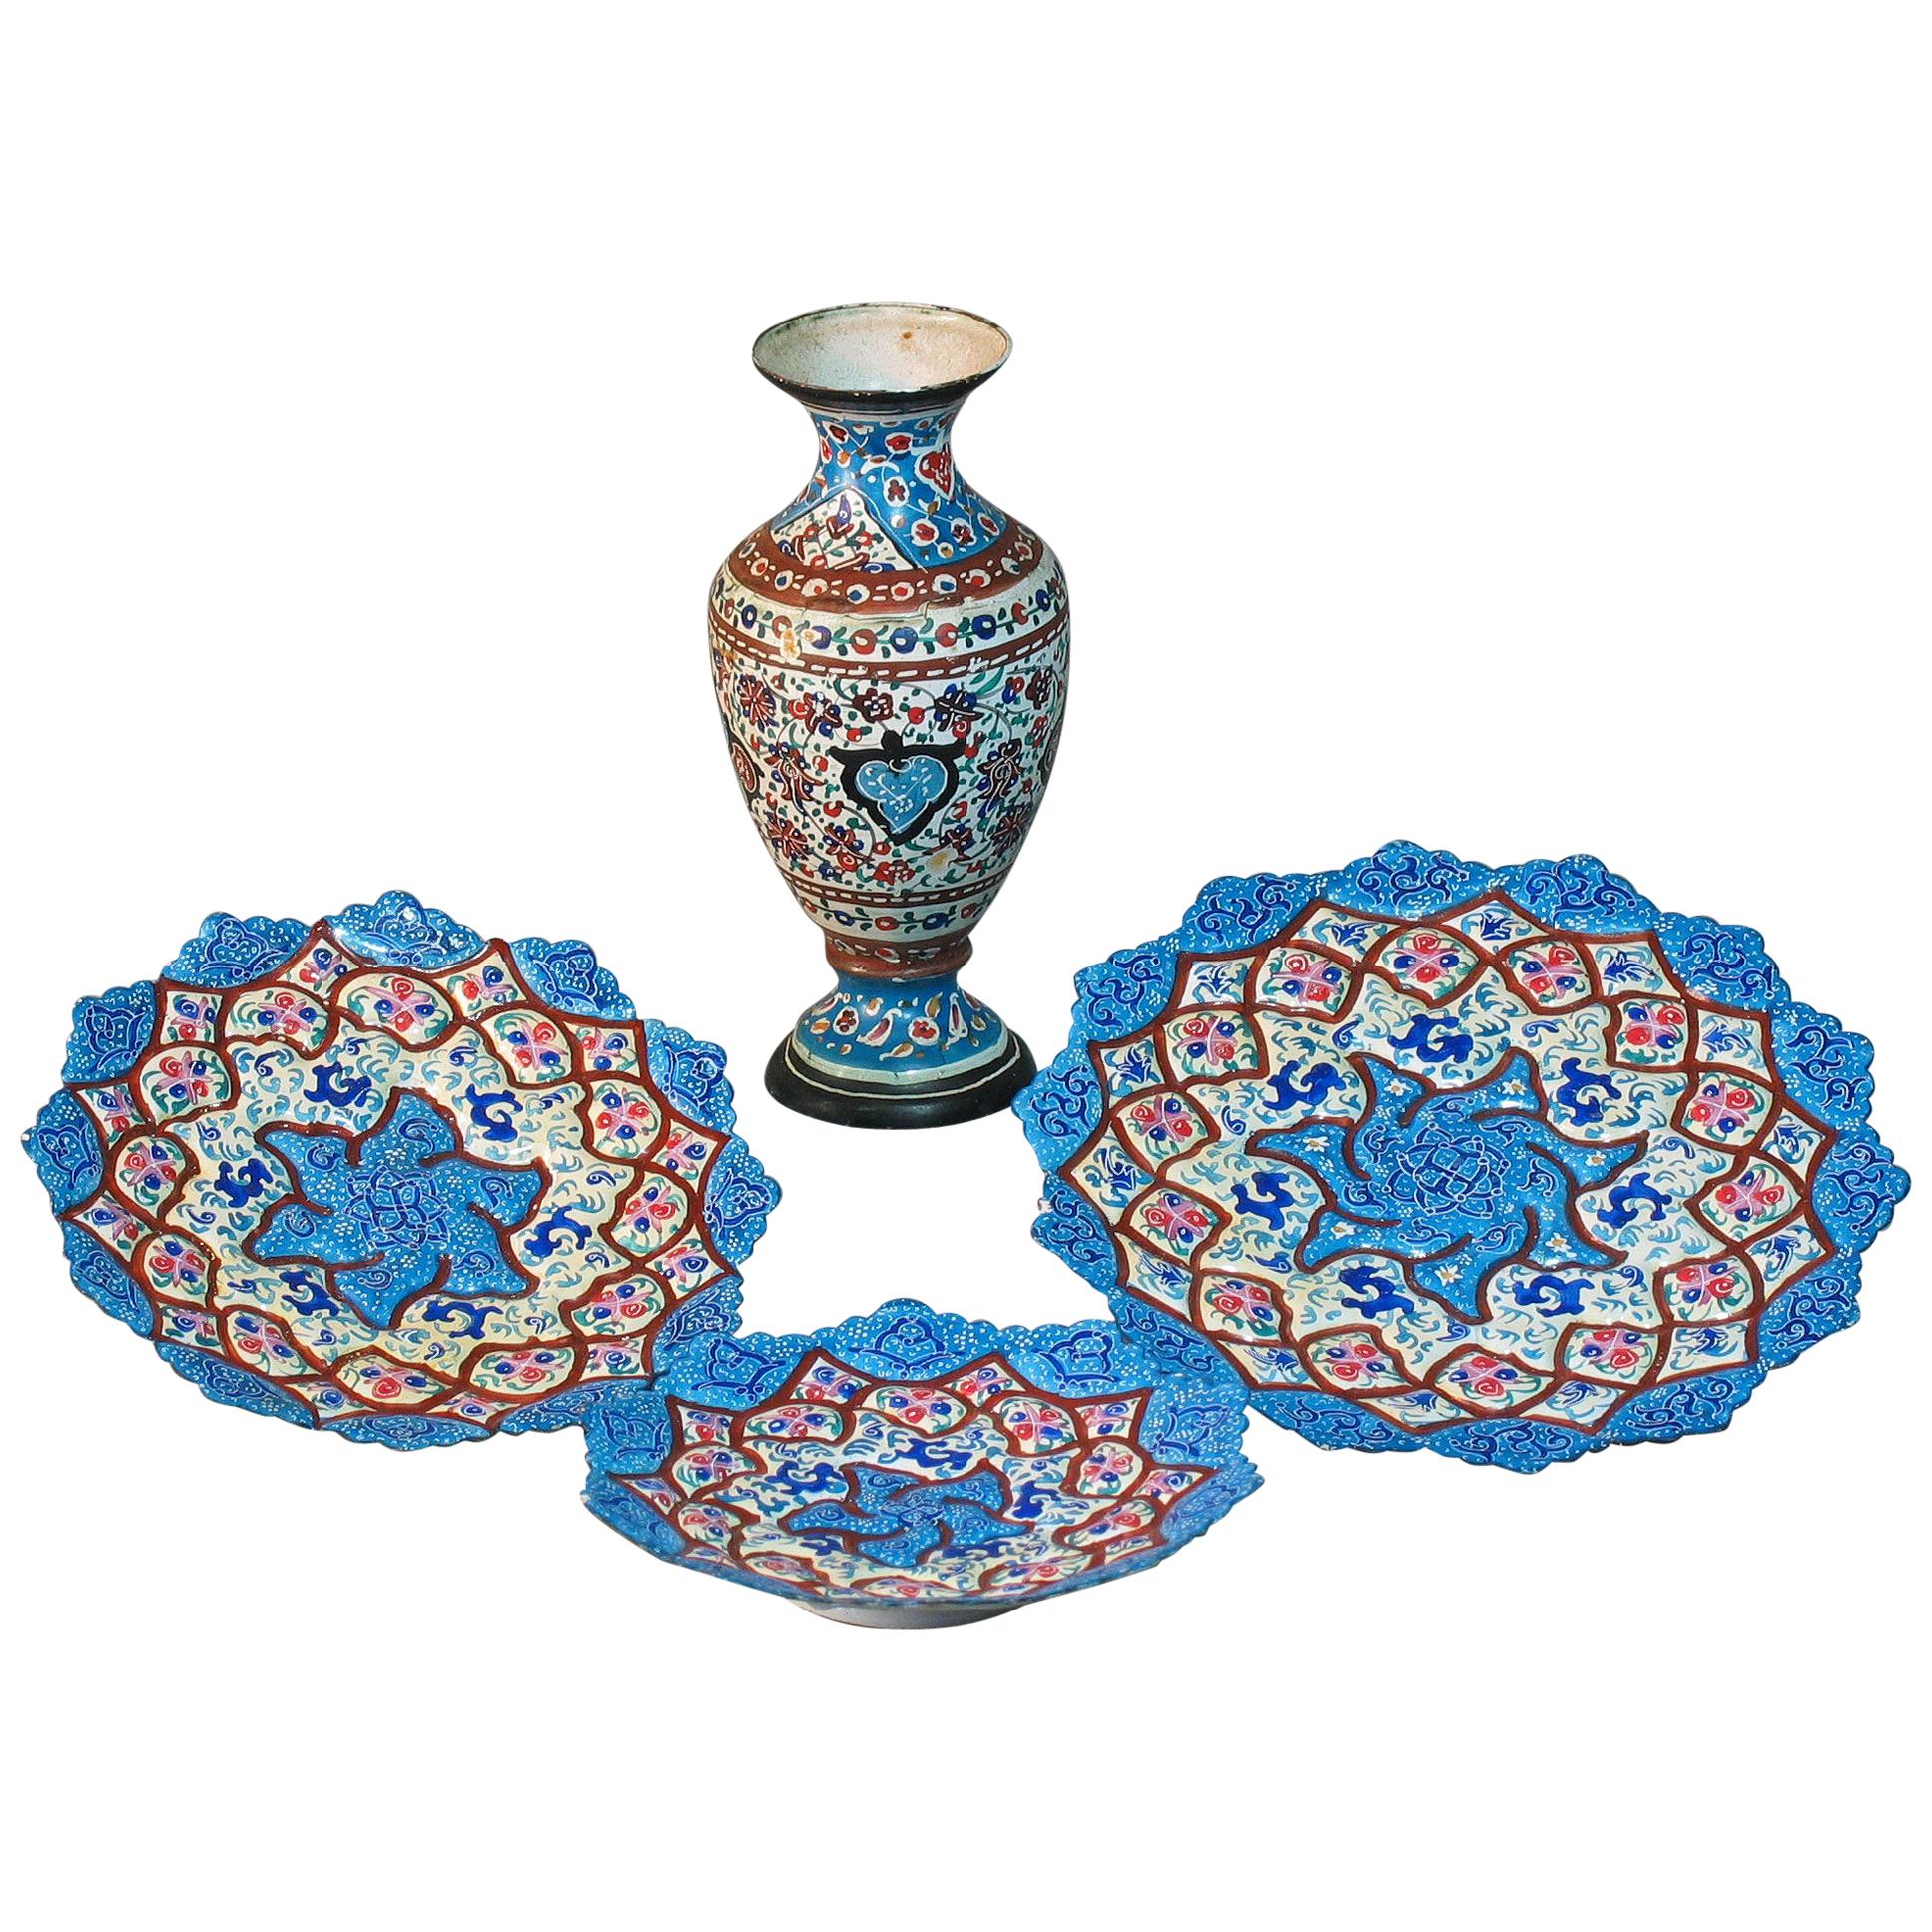 Lot of Four Iranian Minakari Enamel Decorated Small Copper Vase and Plates For Sale